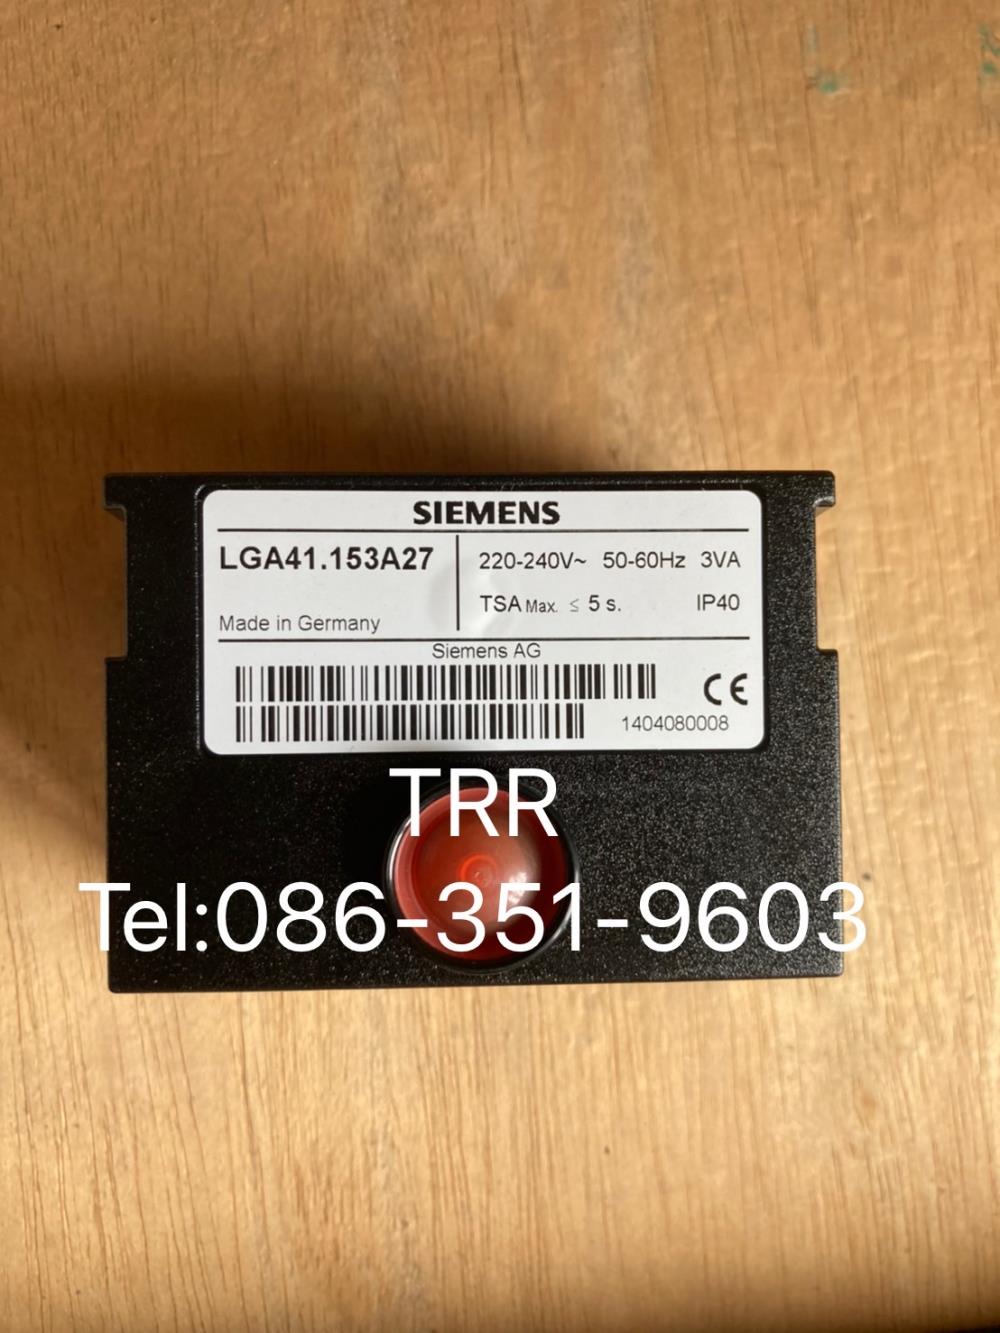 Siemens LGA41.153A27,Siemens LGA41.153A27,Siemens LGA41.153A27,Instruments and Controls/Controllers